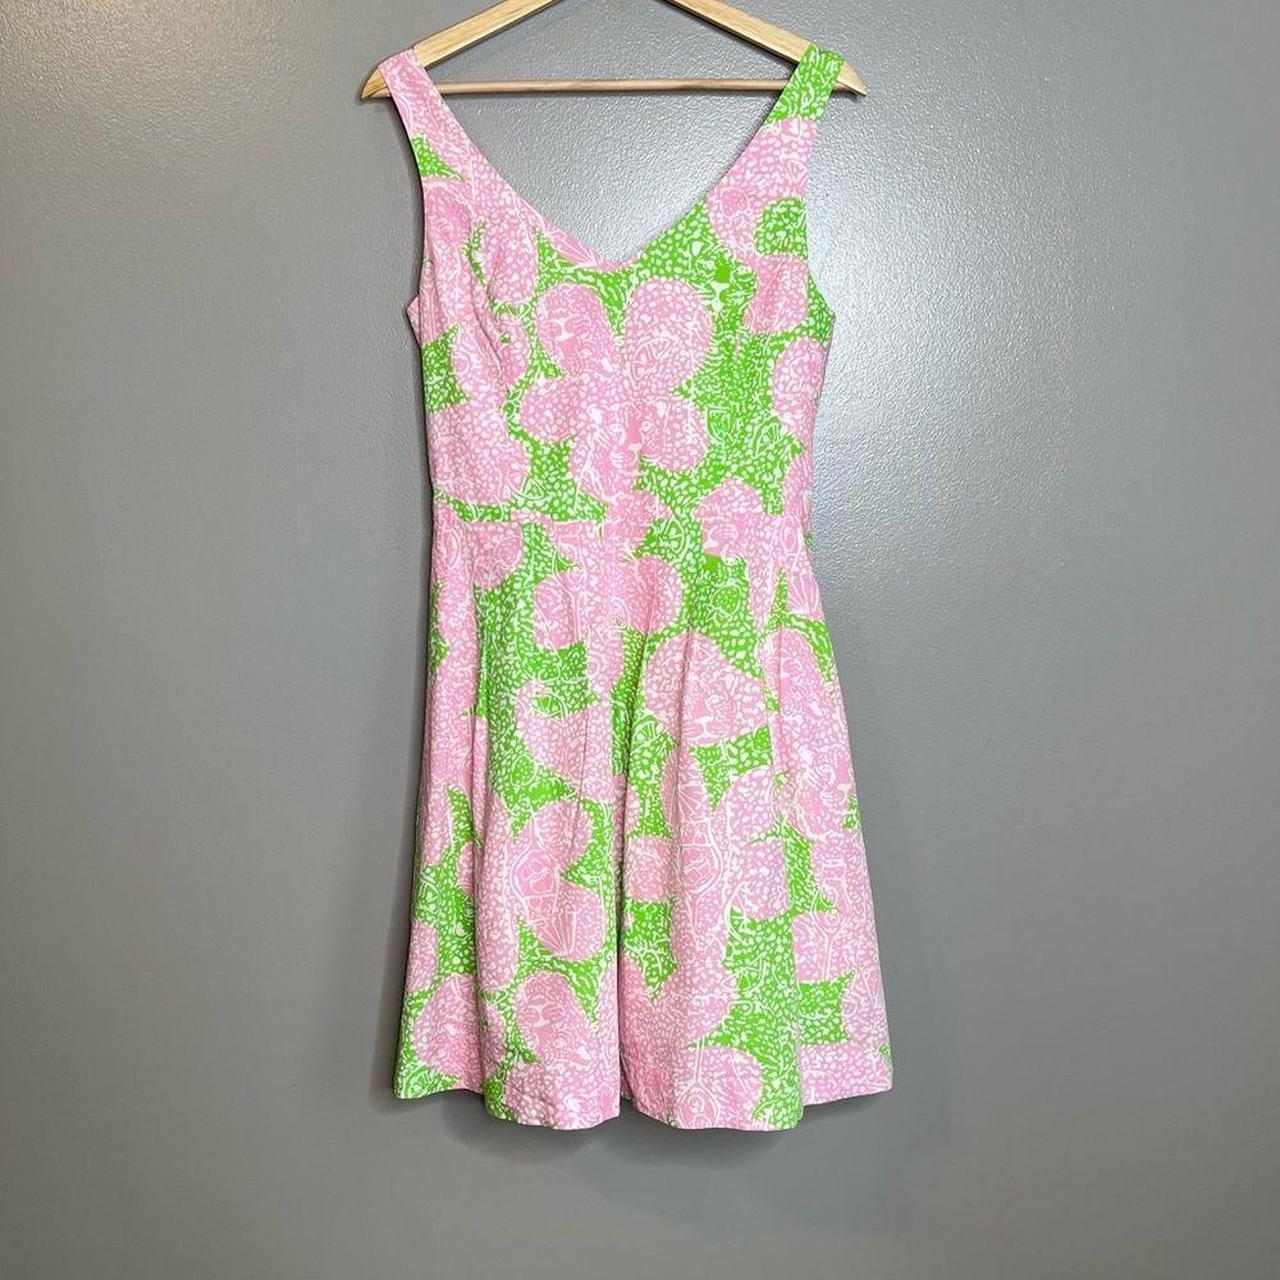 Lilly Pulitzer Women's Green and Pink Dress (3)